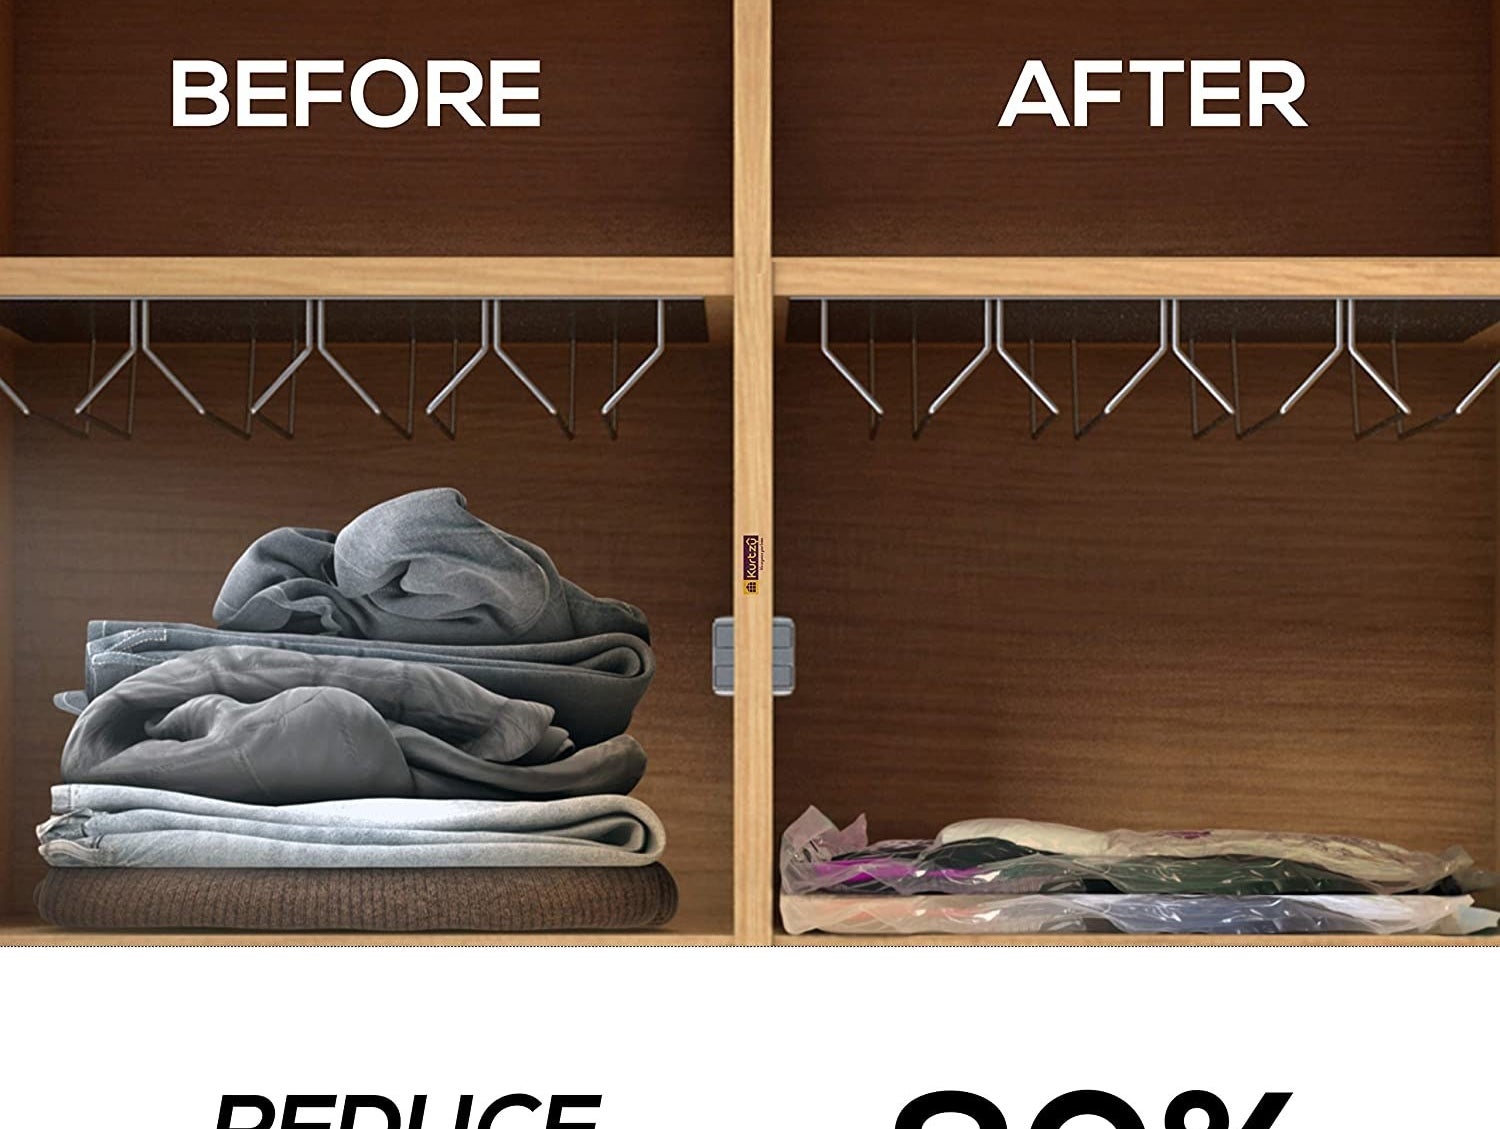 Before and after comparison of storing clothes with and without the vacuum bags.